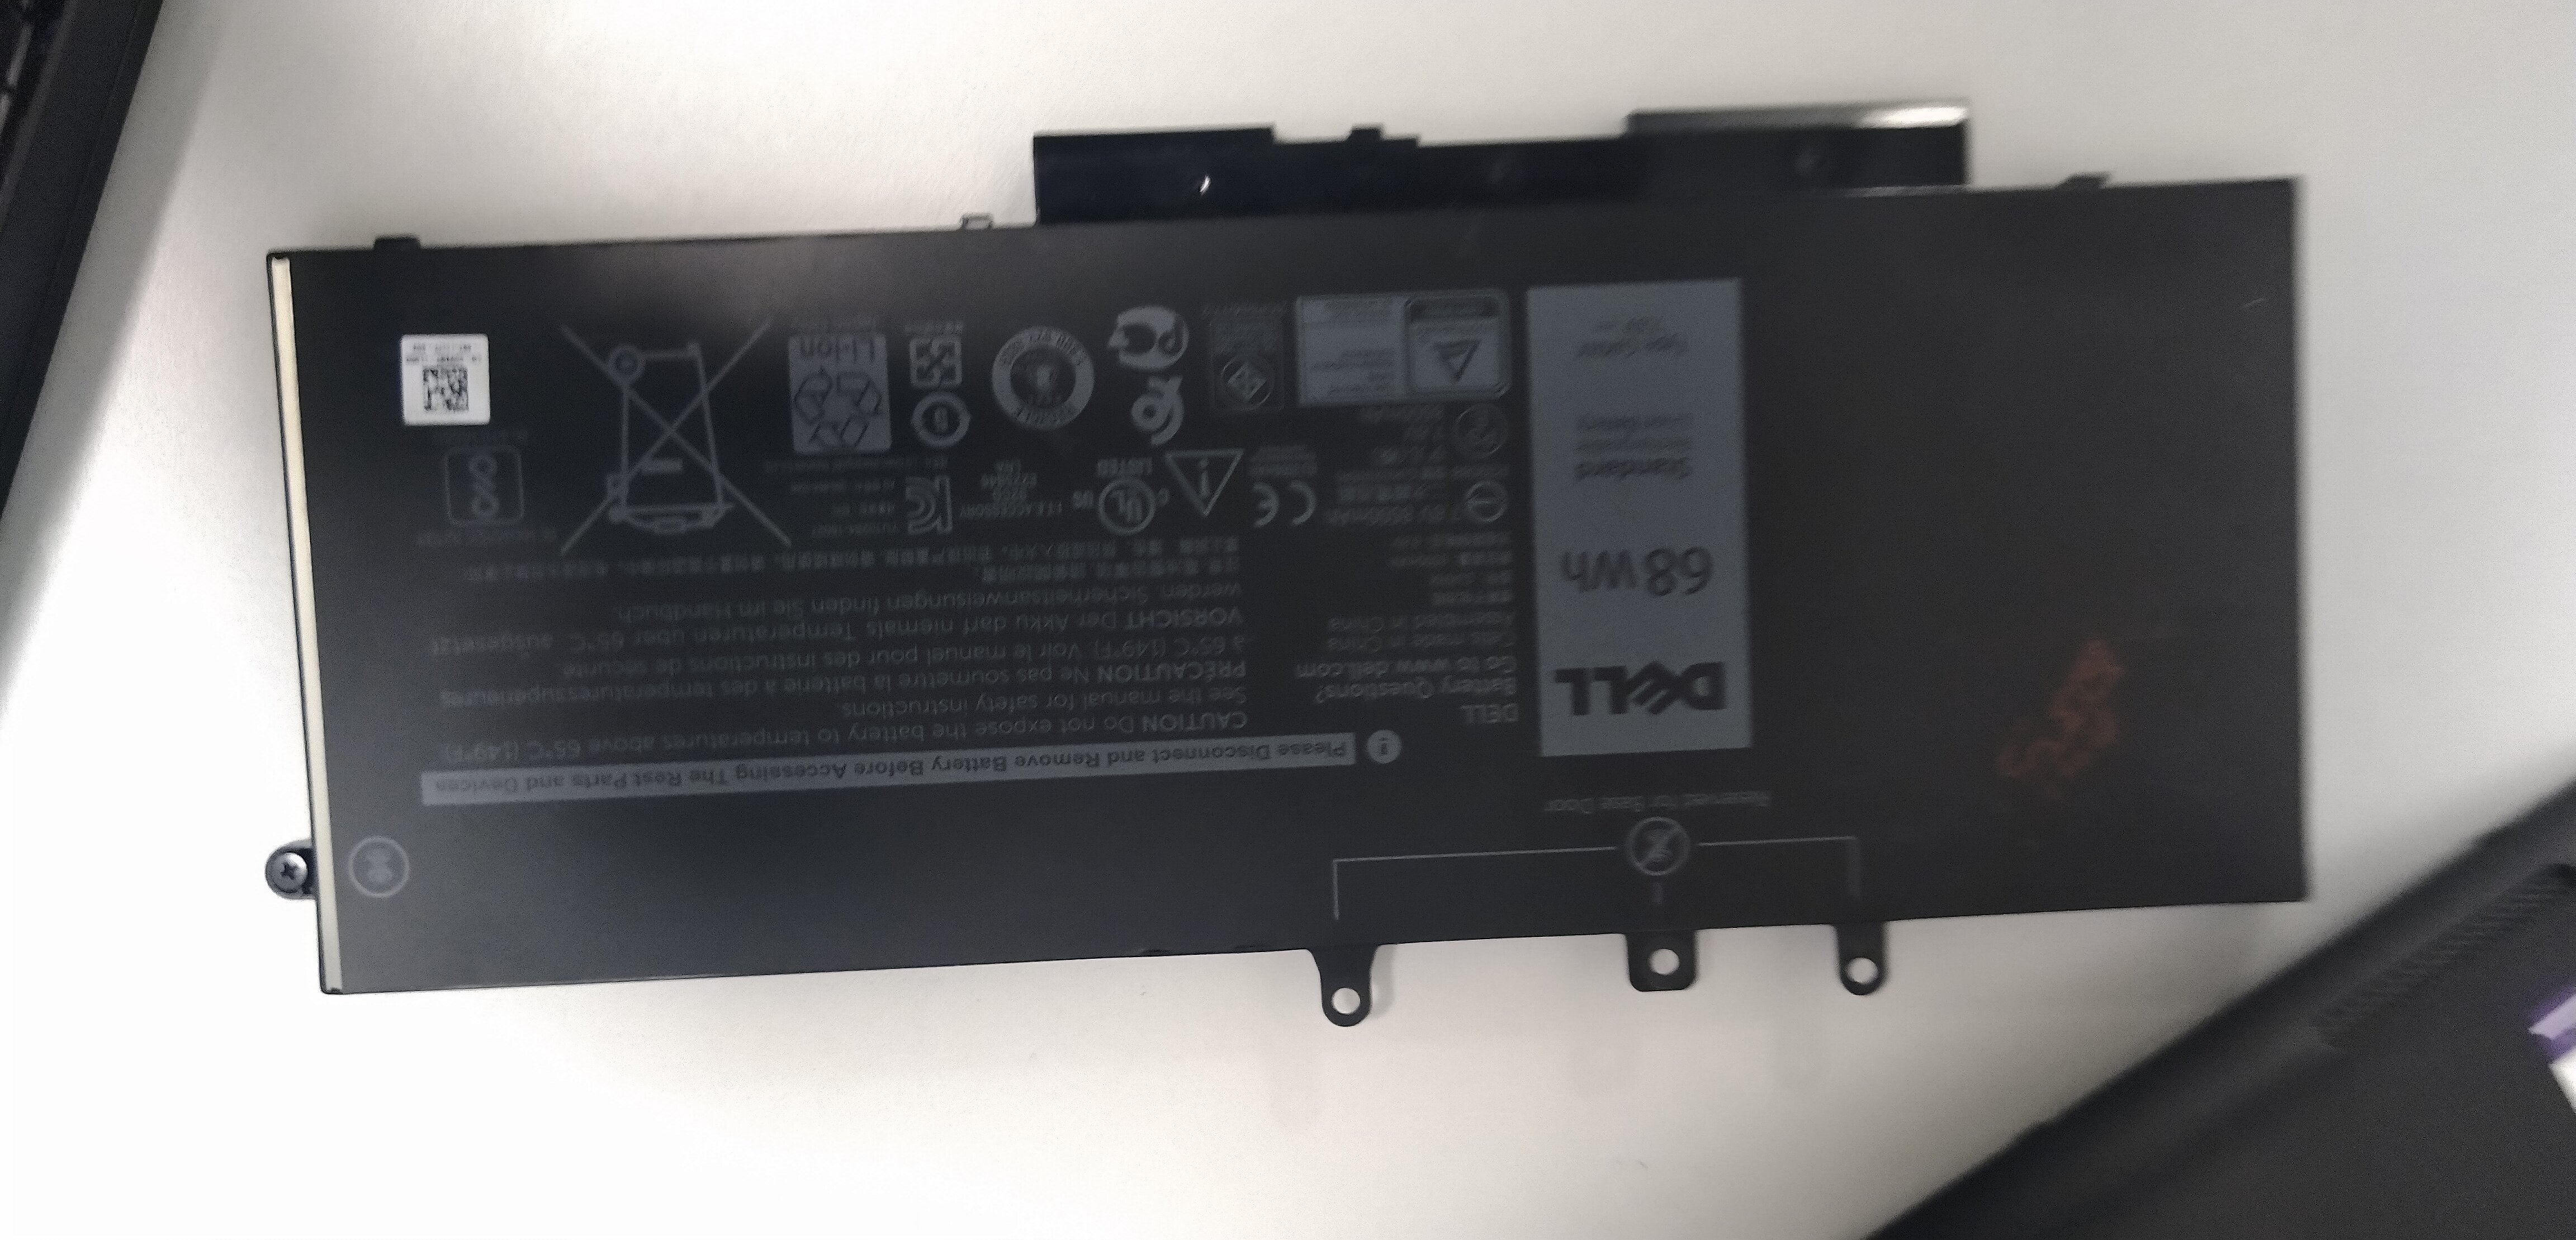 dell latiude 5580 battery problem repairing centre in chennai,h25,annanager(E),4th mainroad,chennai-102,Services,Free Classifieds,Post Free Ads,77traders.com